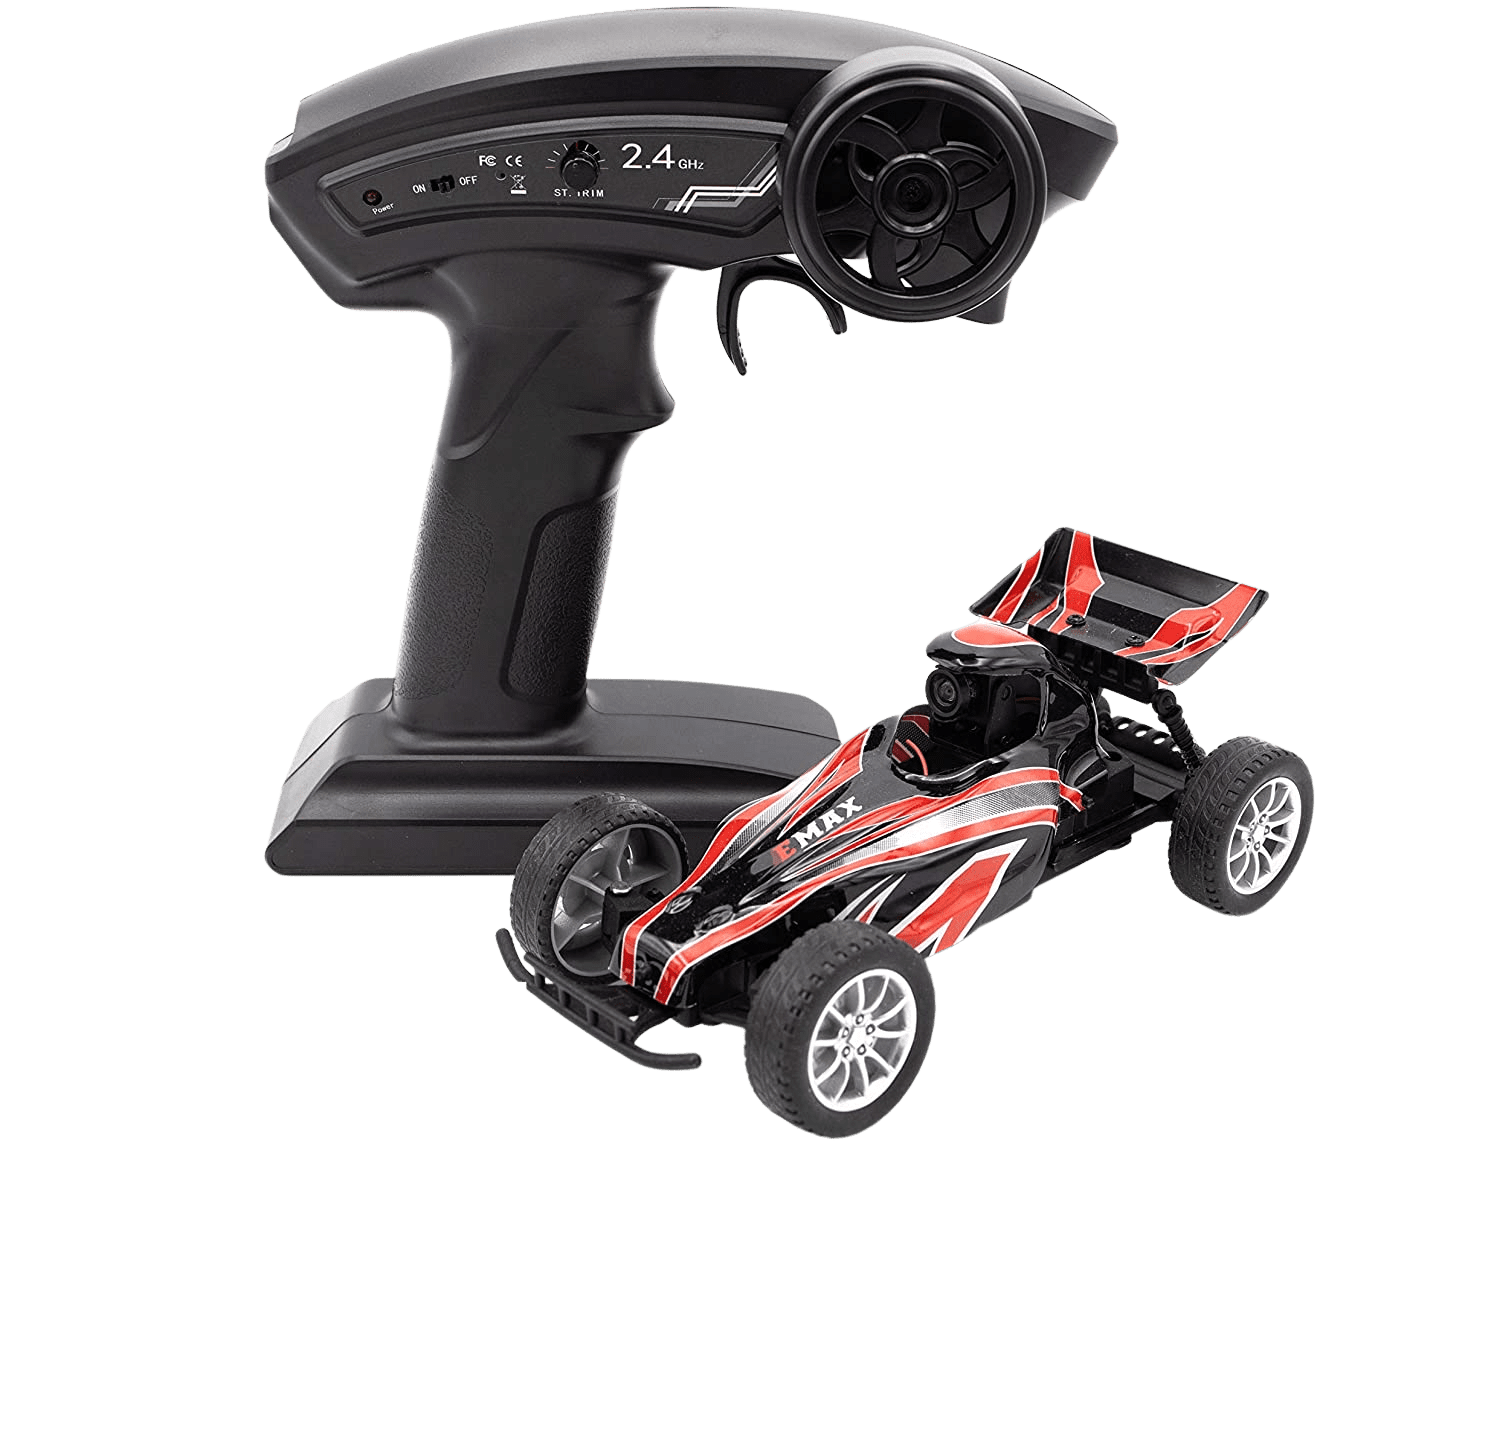 EMAX Interceptor Bnr Realtime FPV Camera Race Car | Decor Gifts and More